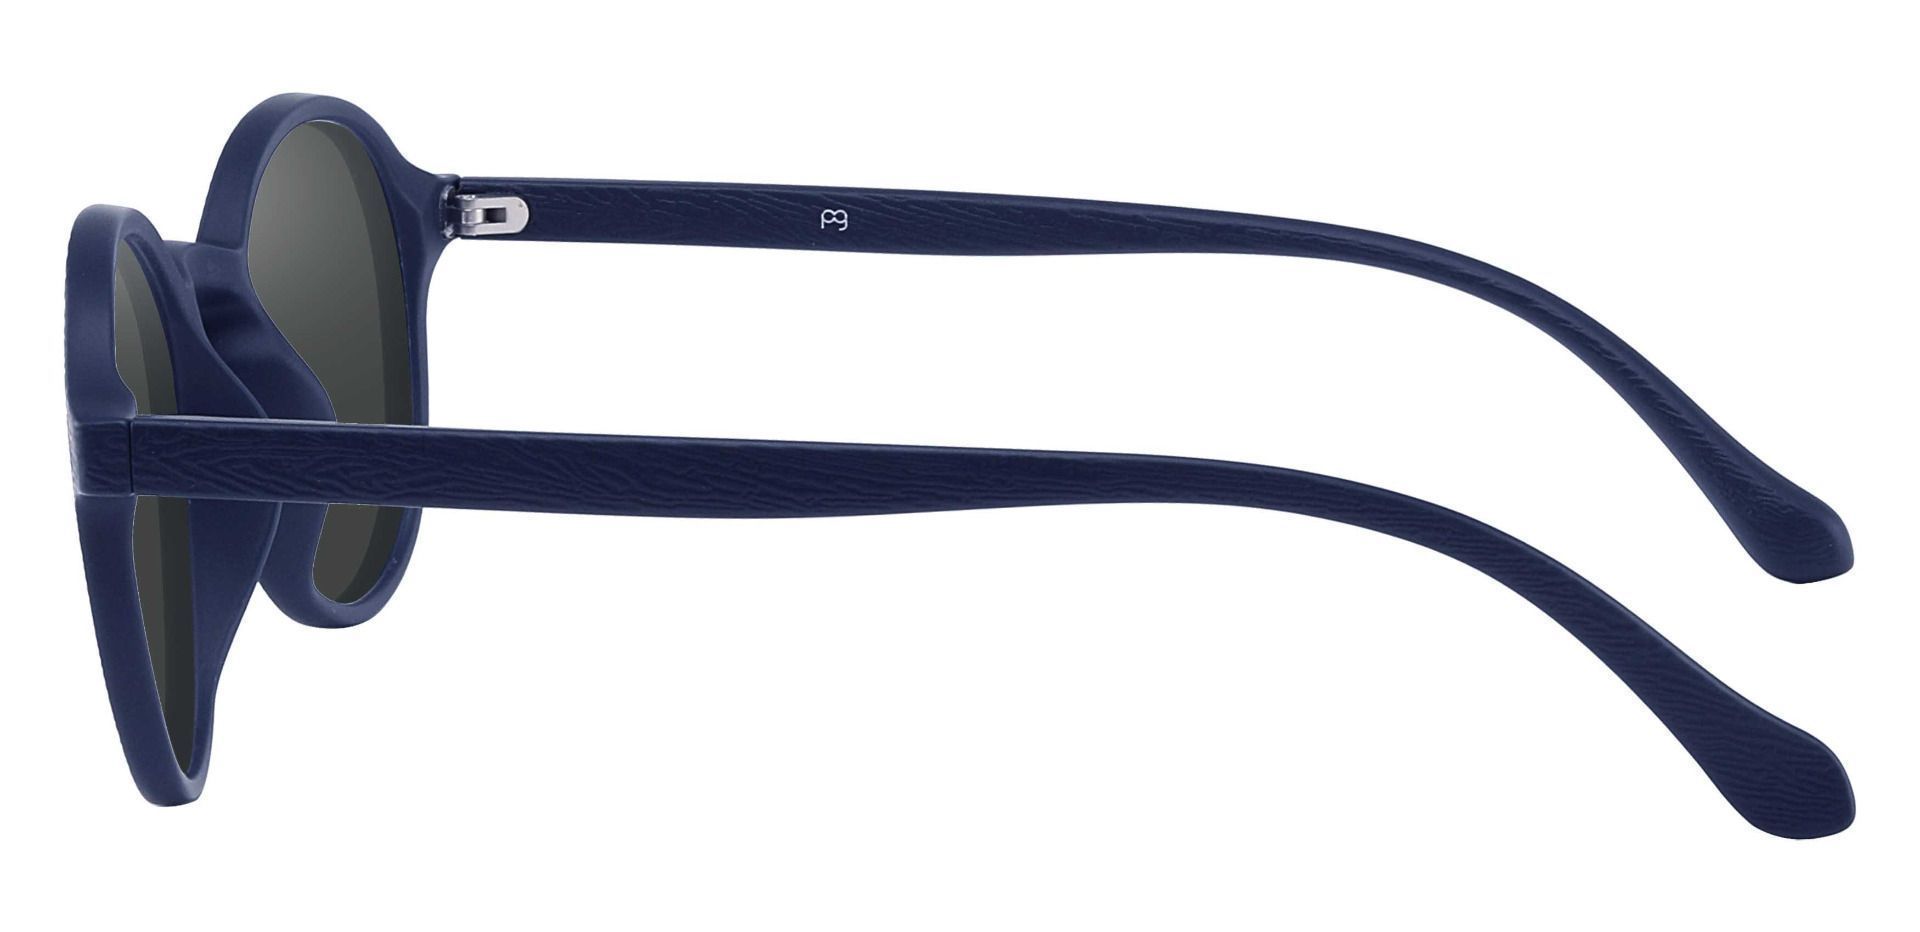 Whitney Round Non-Rx Sunglasses - Blue Frame With Gray Lenses